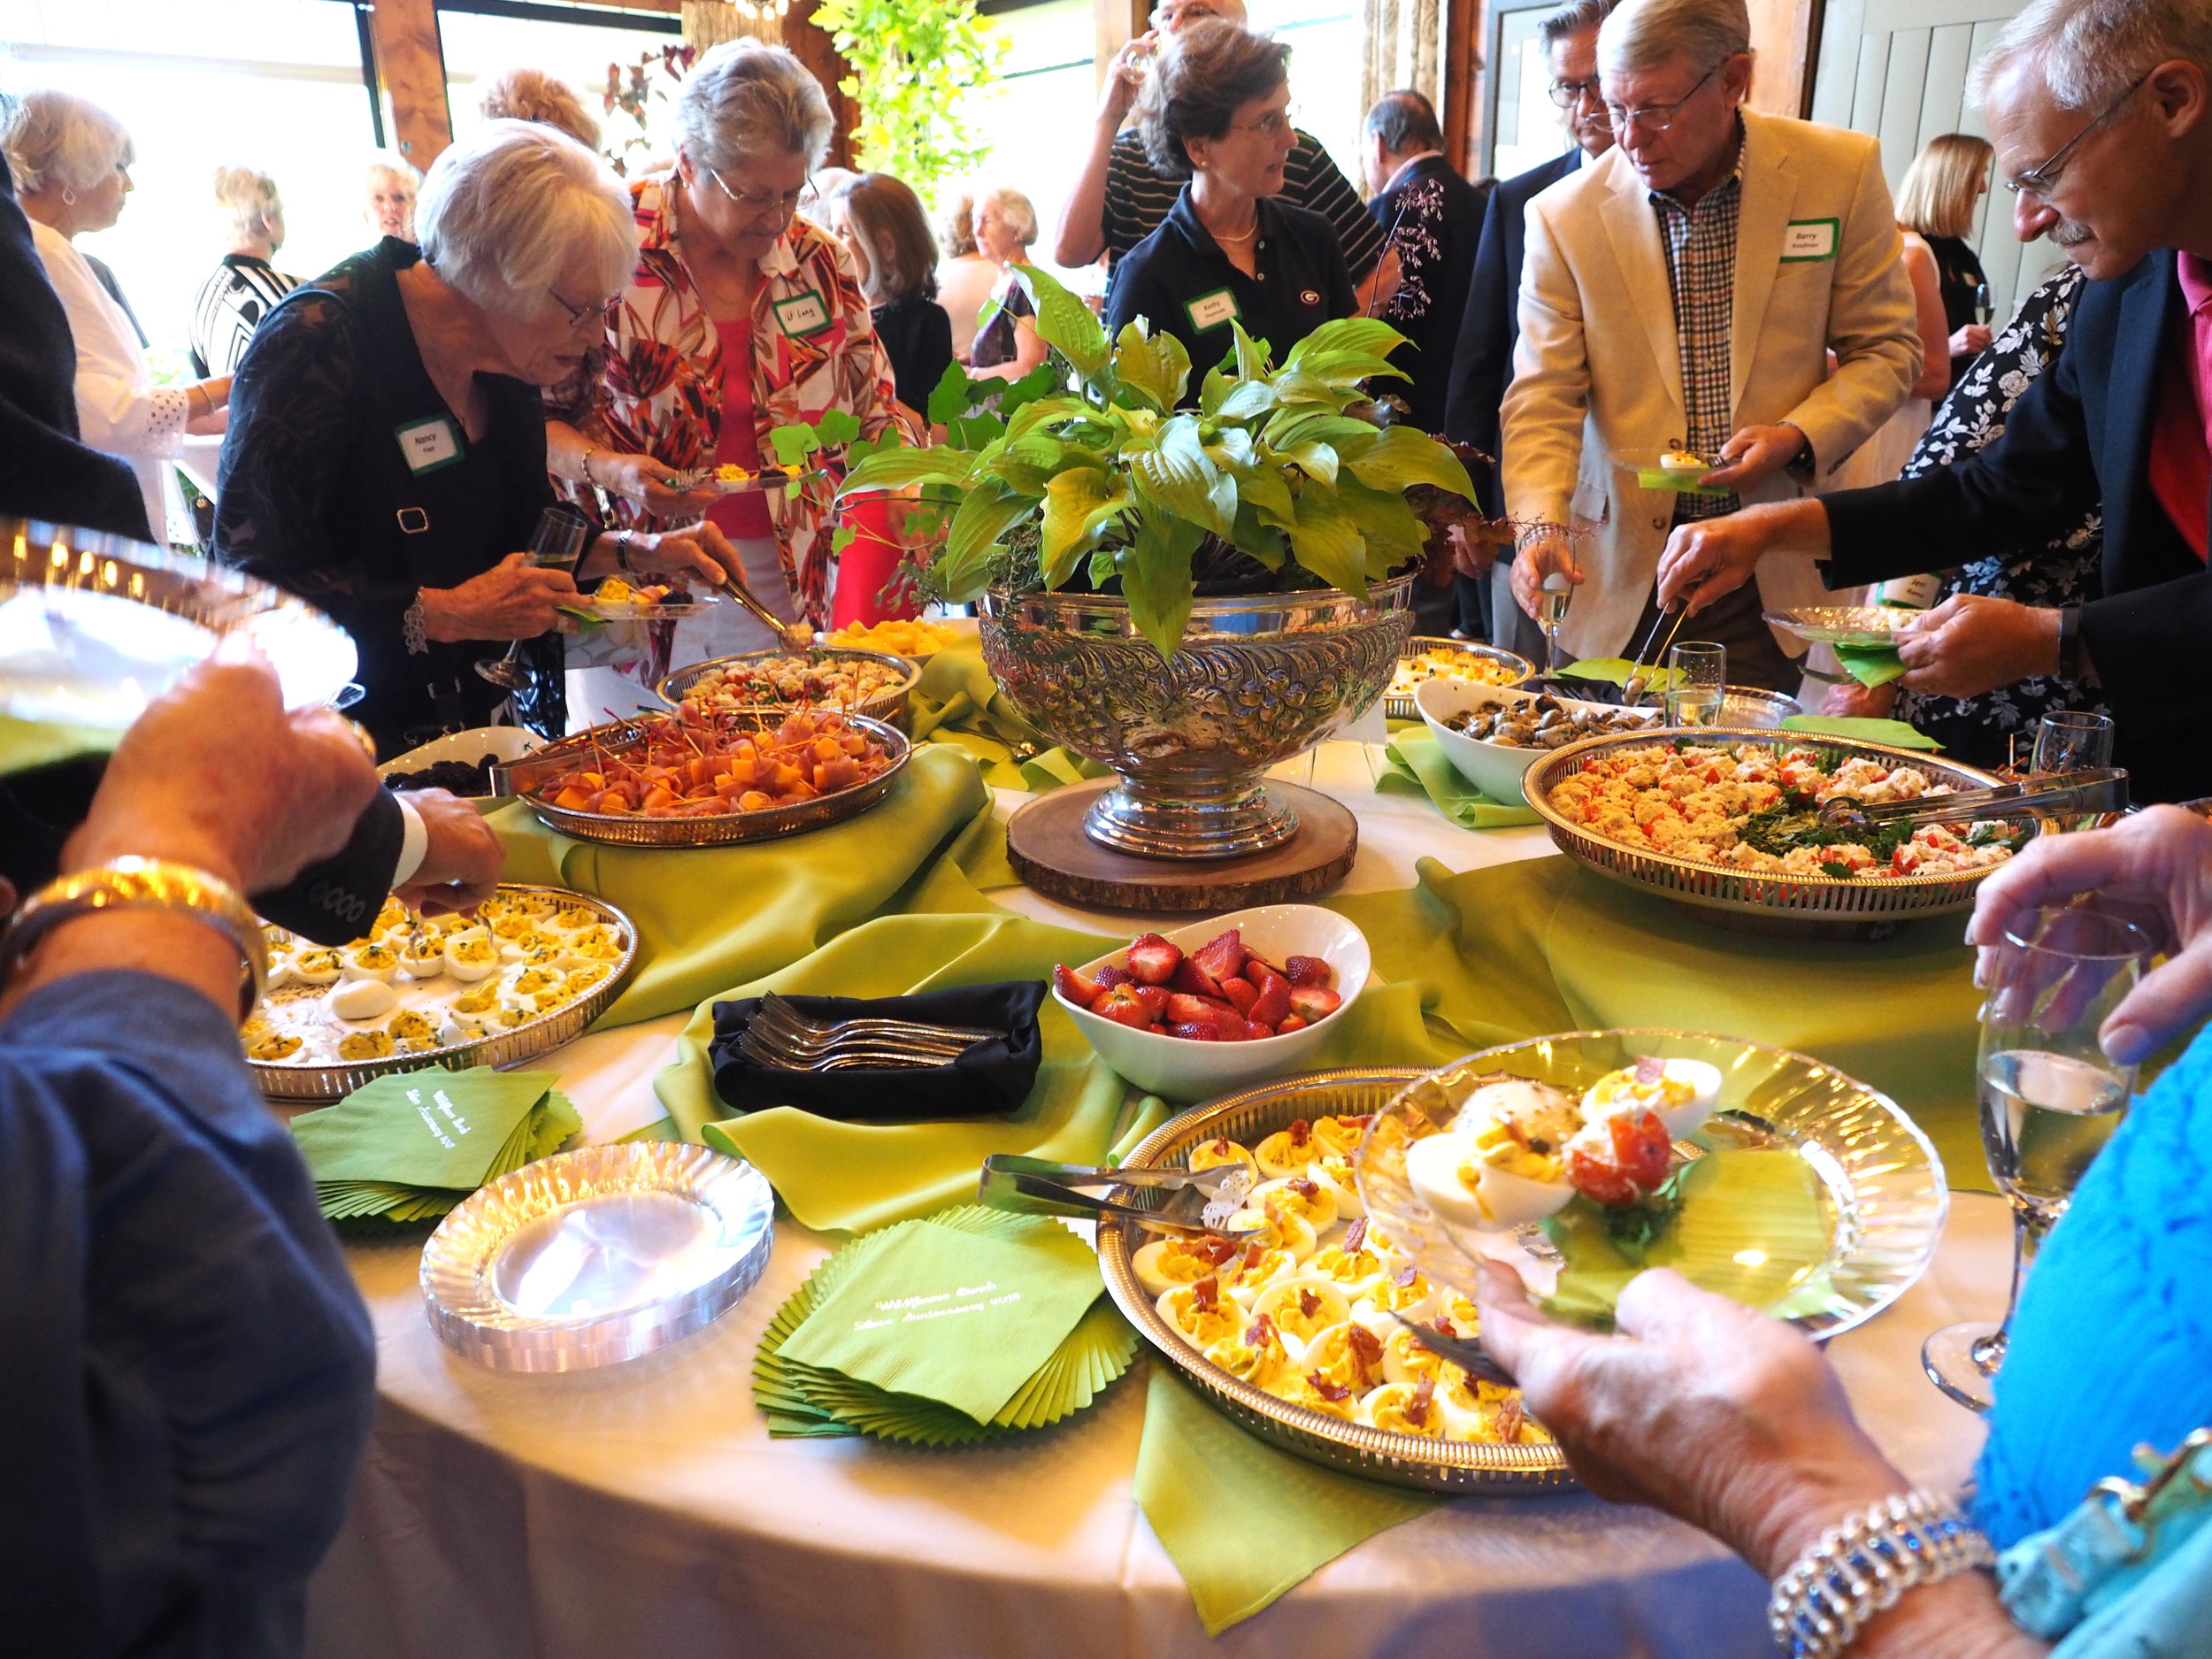 Following the conversation and toast with the Dooleys, WFB celebrants  	enjoyed a beautiful array of appetizers and more conversation.